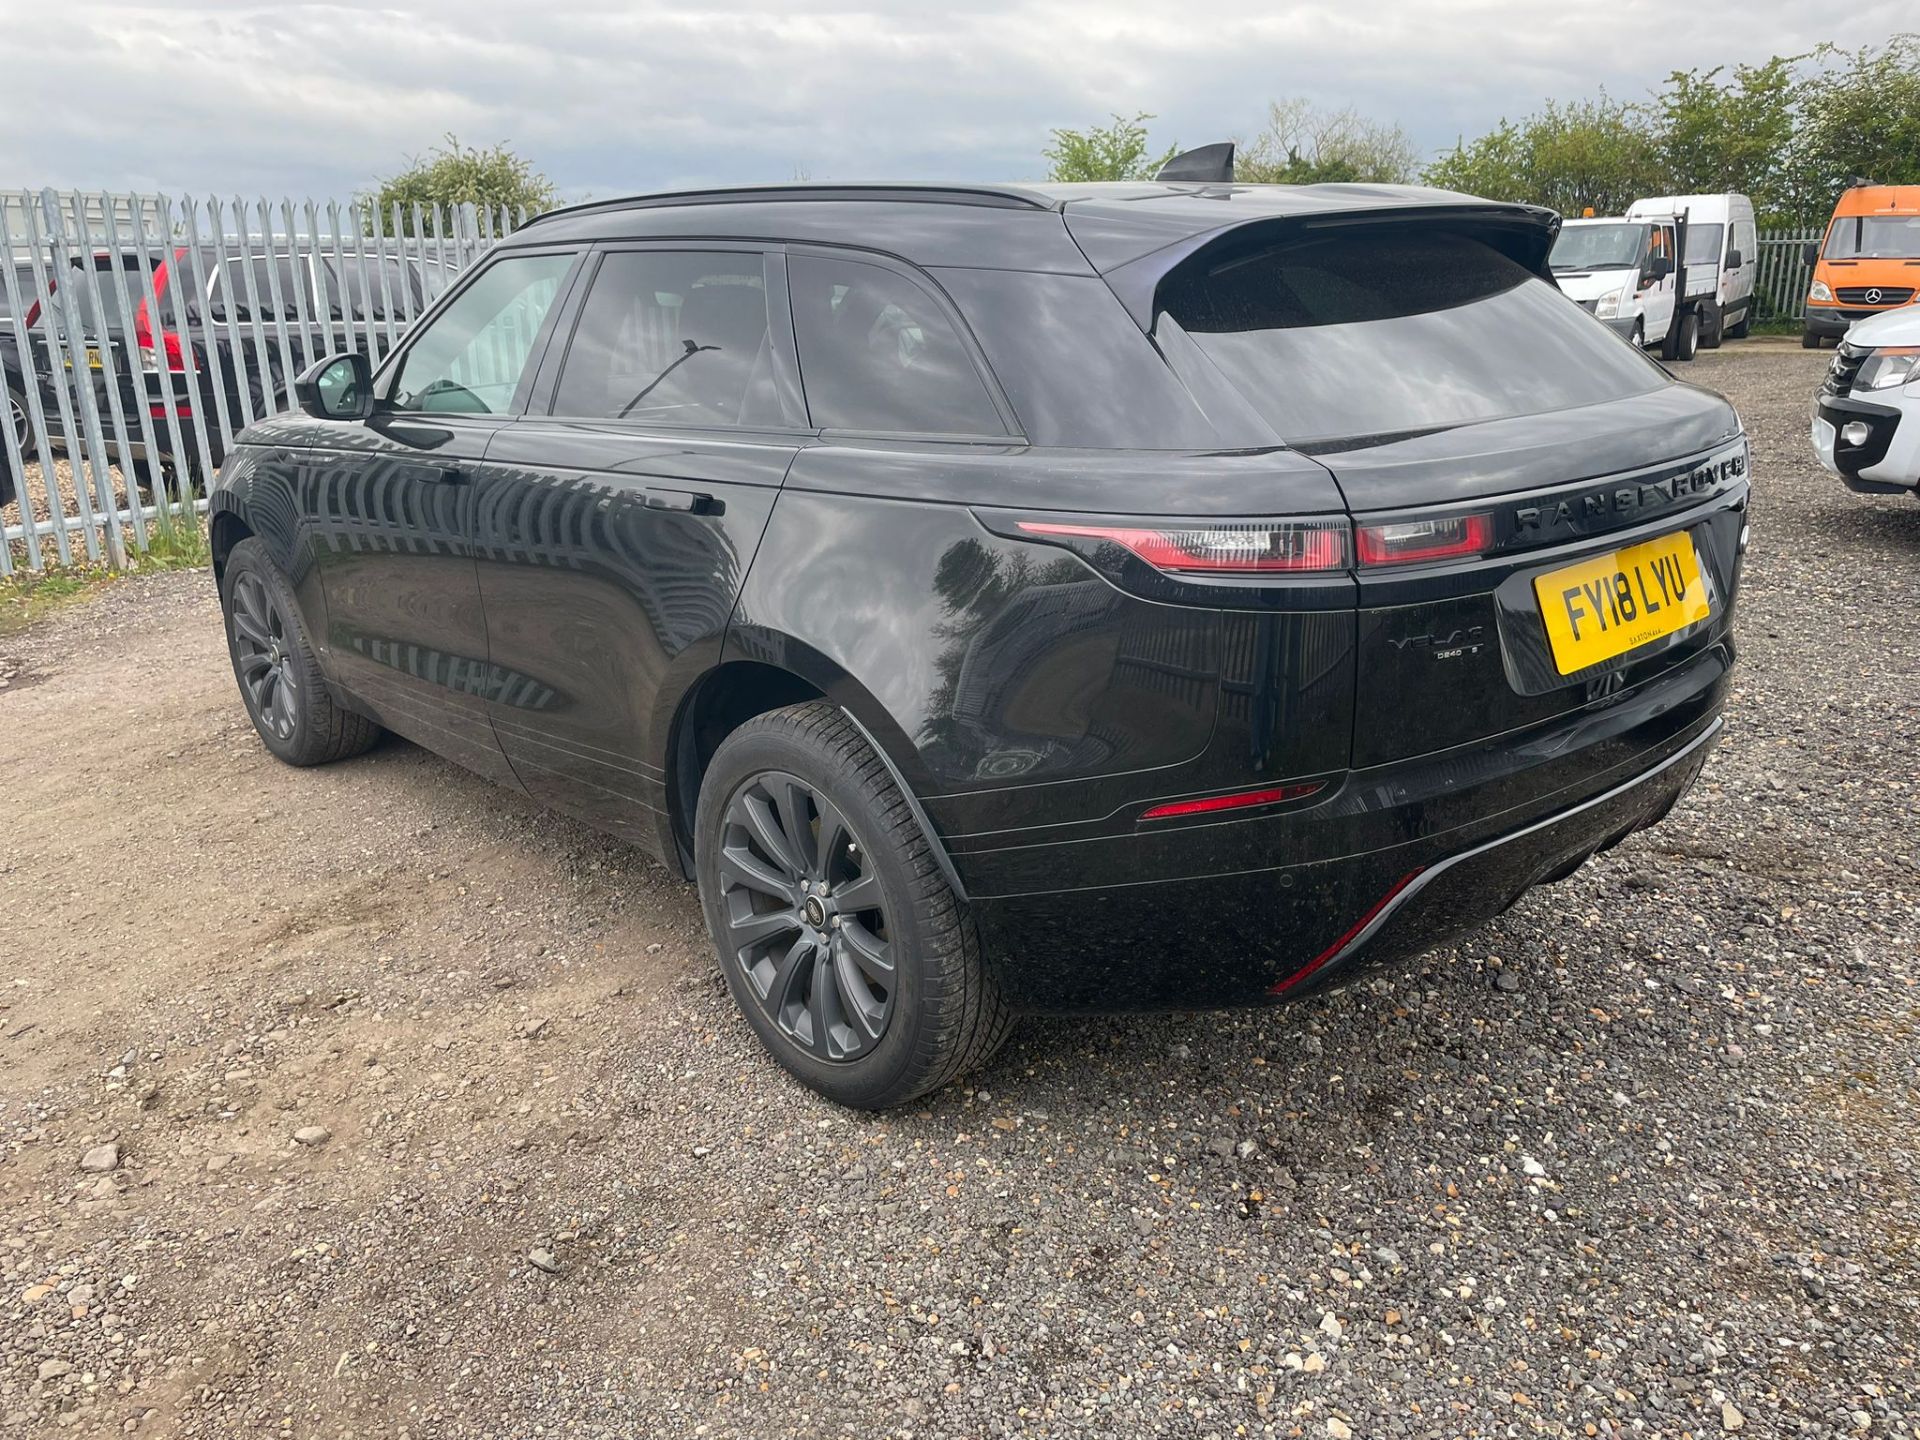 Land Rover Range Rover Velar 2.0 D240 R-Dynamic S 2018 '18 Reg' 4WD - Panoramic Roof- ULEZ Compliant - Image 5 of 33